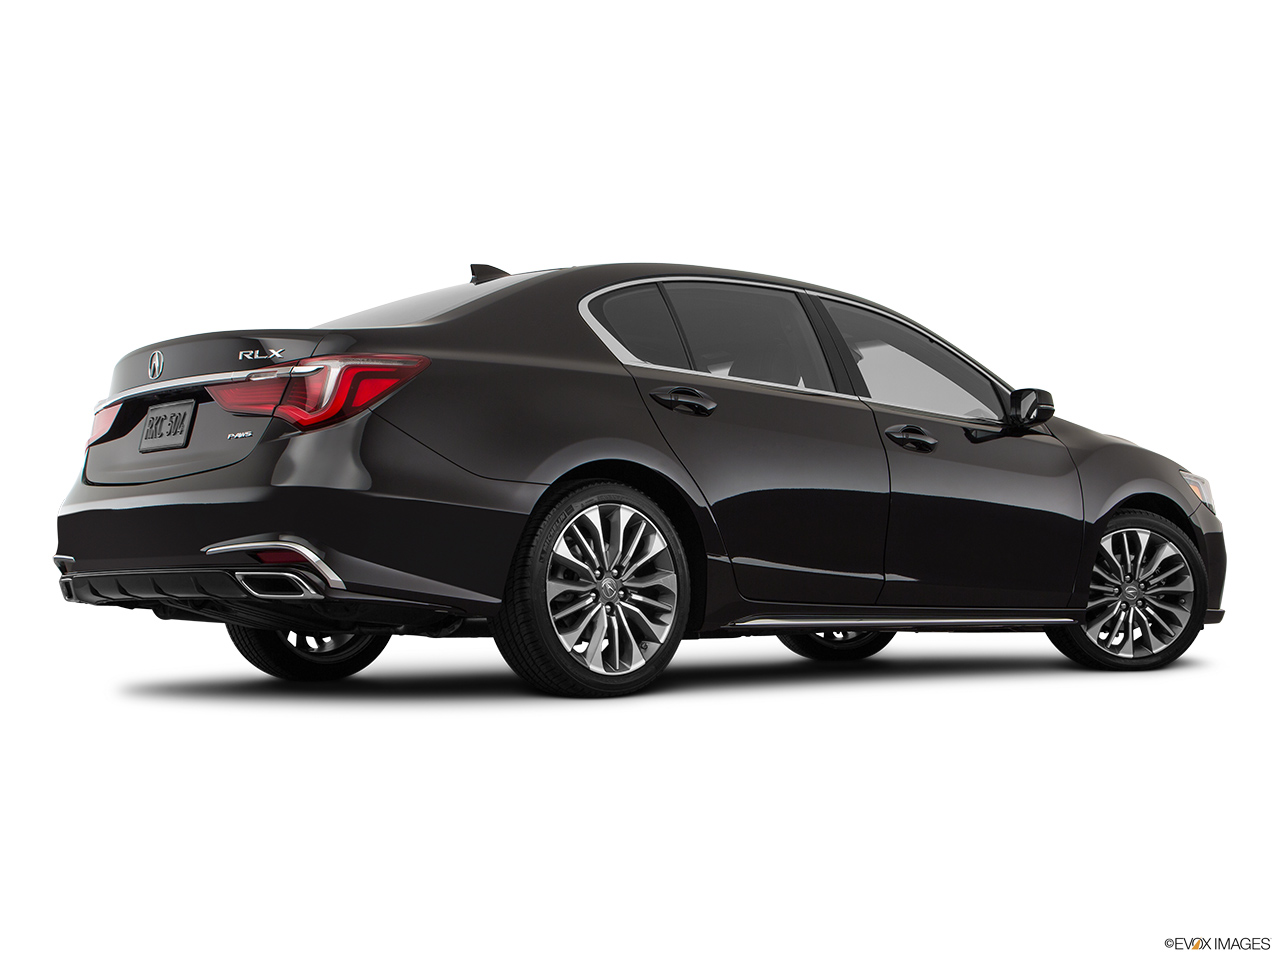 2019 Acura RLX Base Low/wide rear 5/8. 